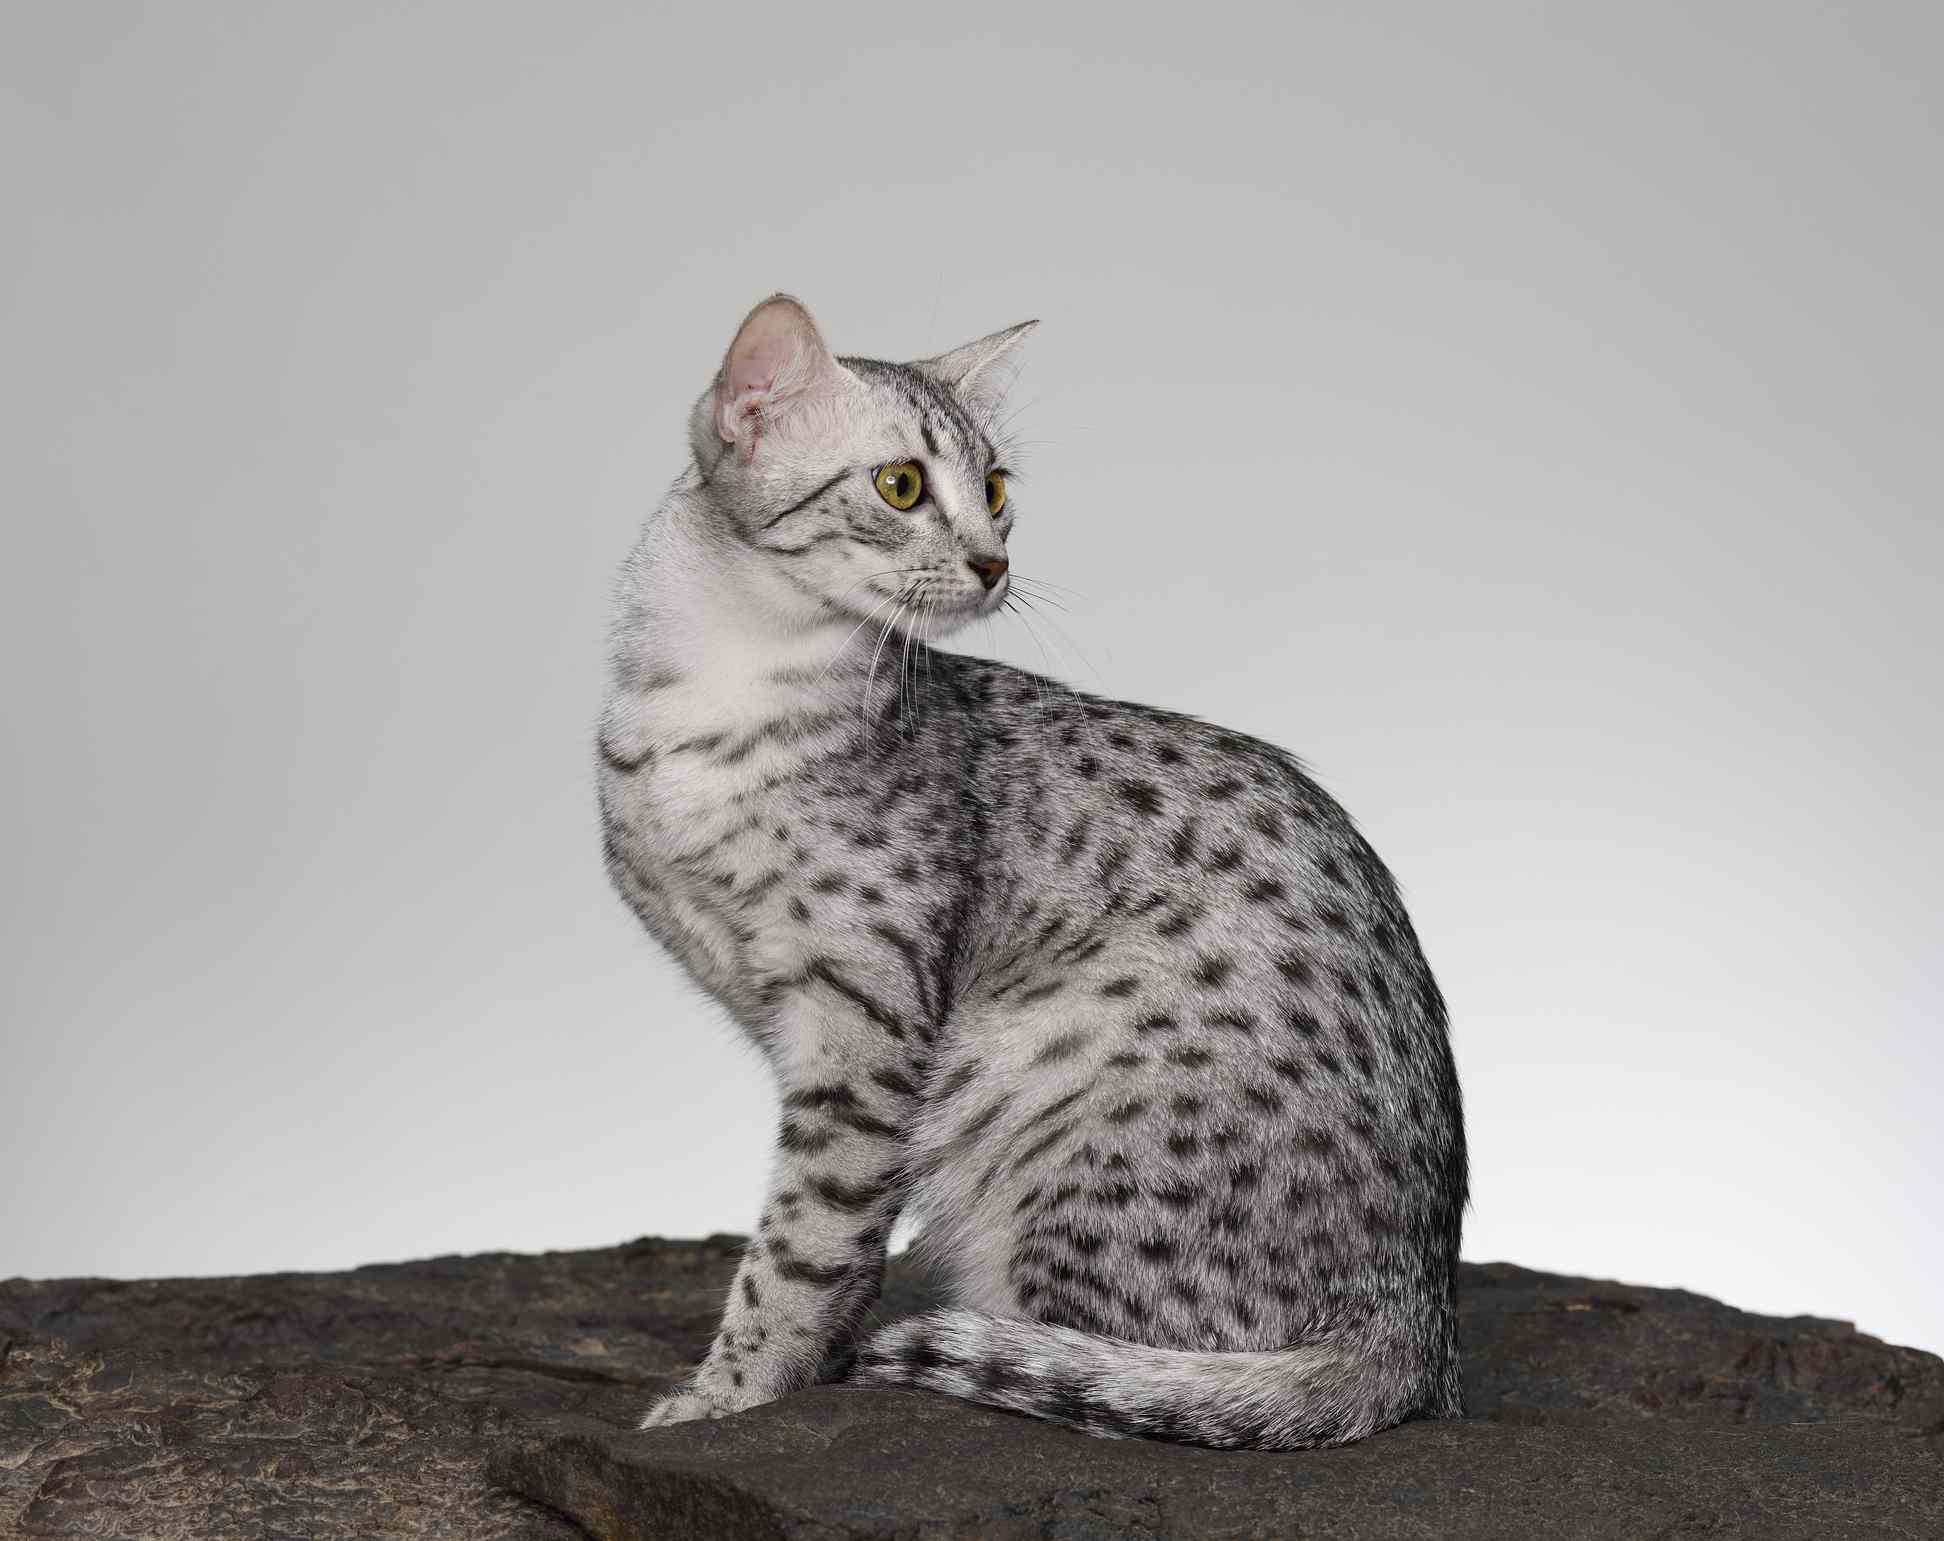 A spotted Egyptian Mau cat sitting up but looking behind him.